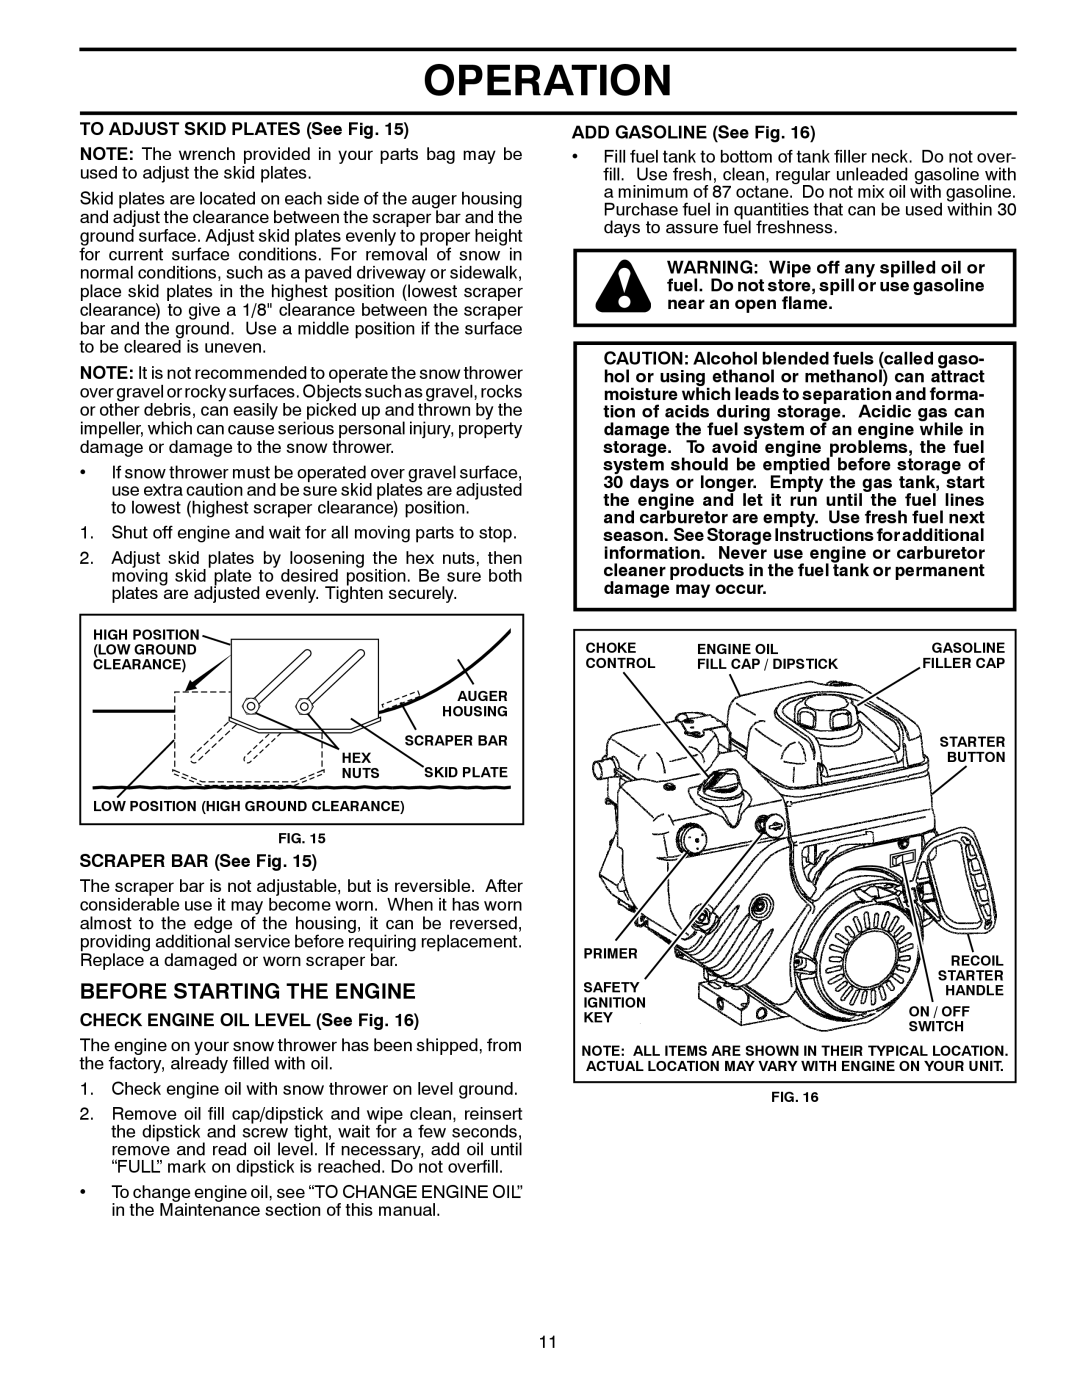 Poulan 96192003301, 430352 Before Starting The Engine, Operation, TO ADJUST SKID PLATES See Fig, SCRAPER BAR See Fig 